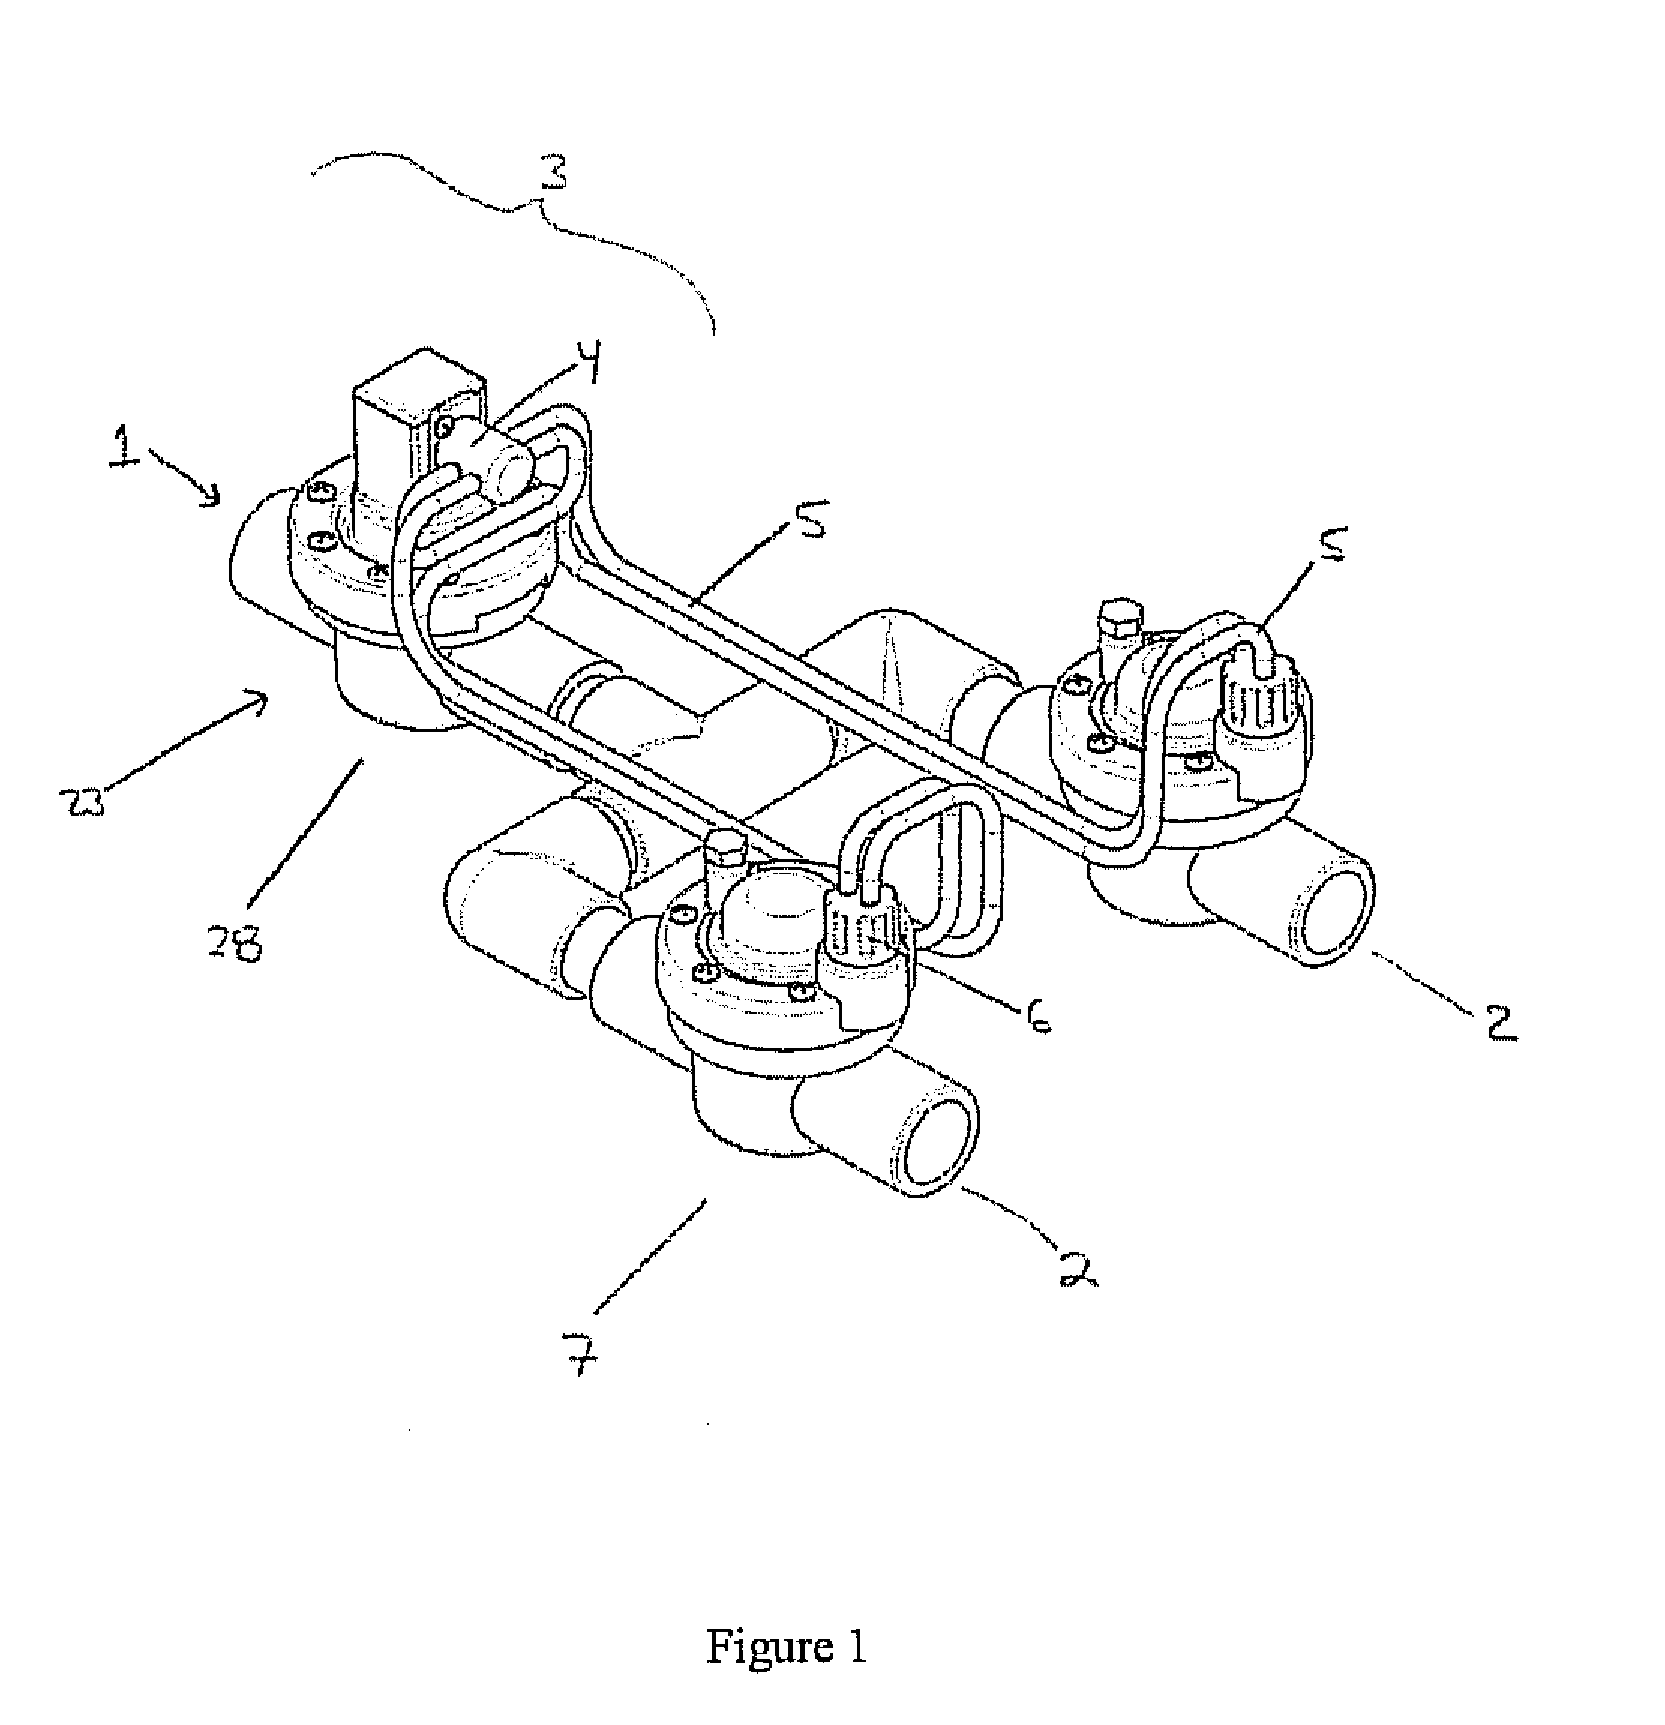 Fluid activated flow control system